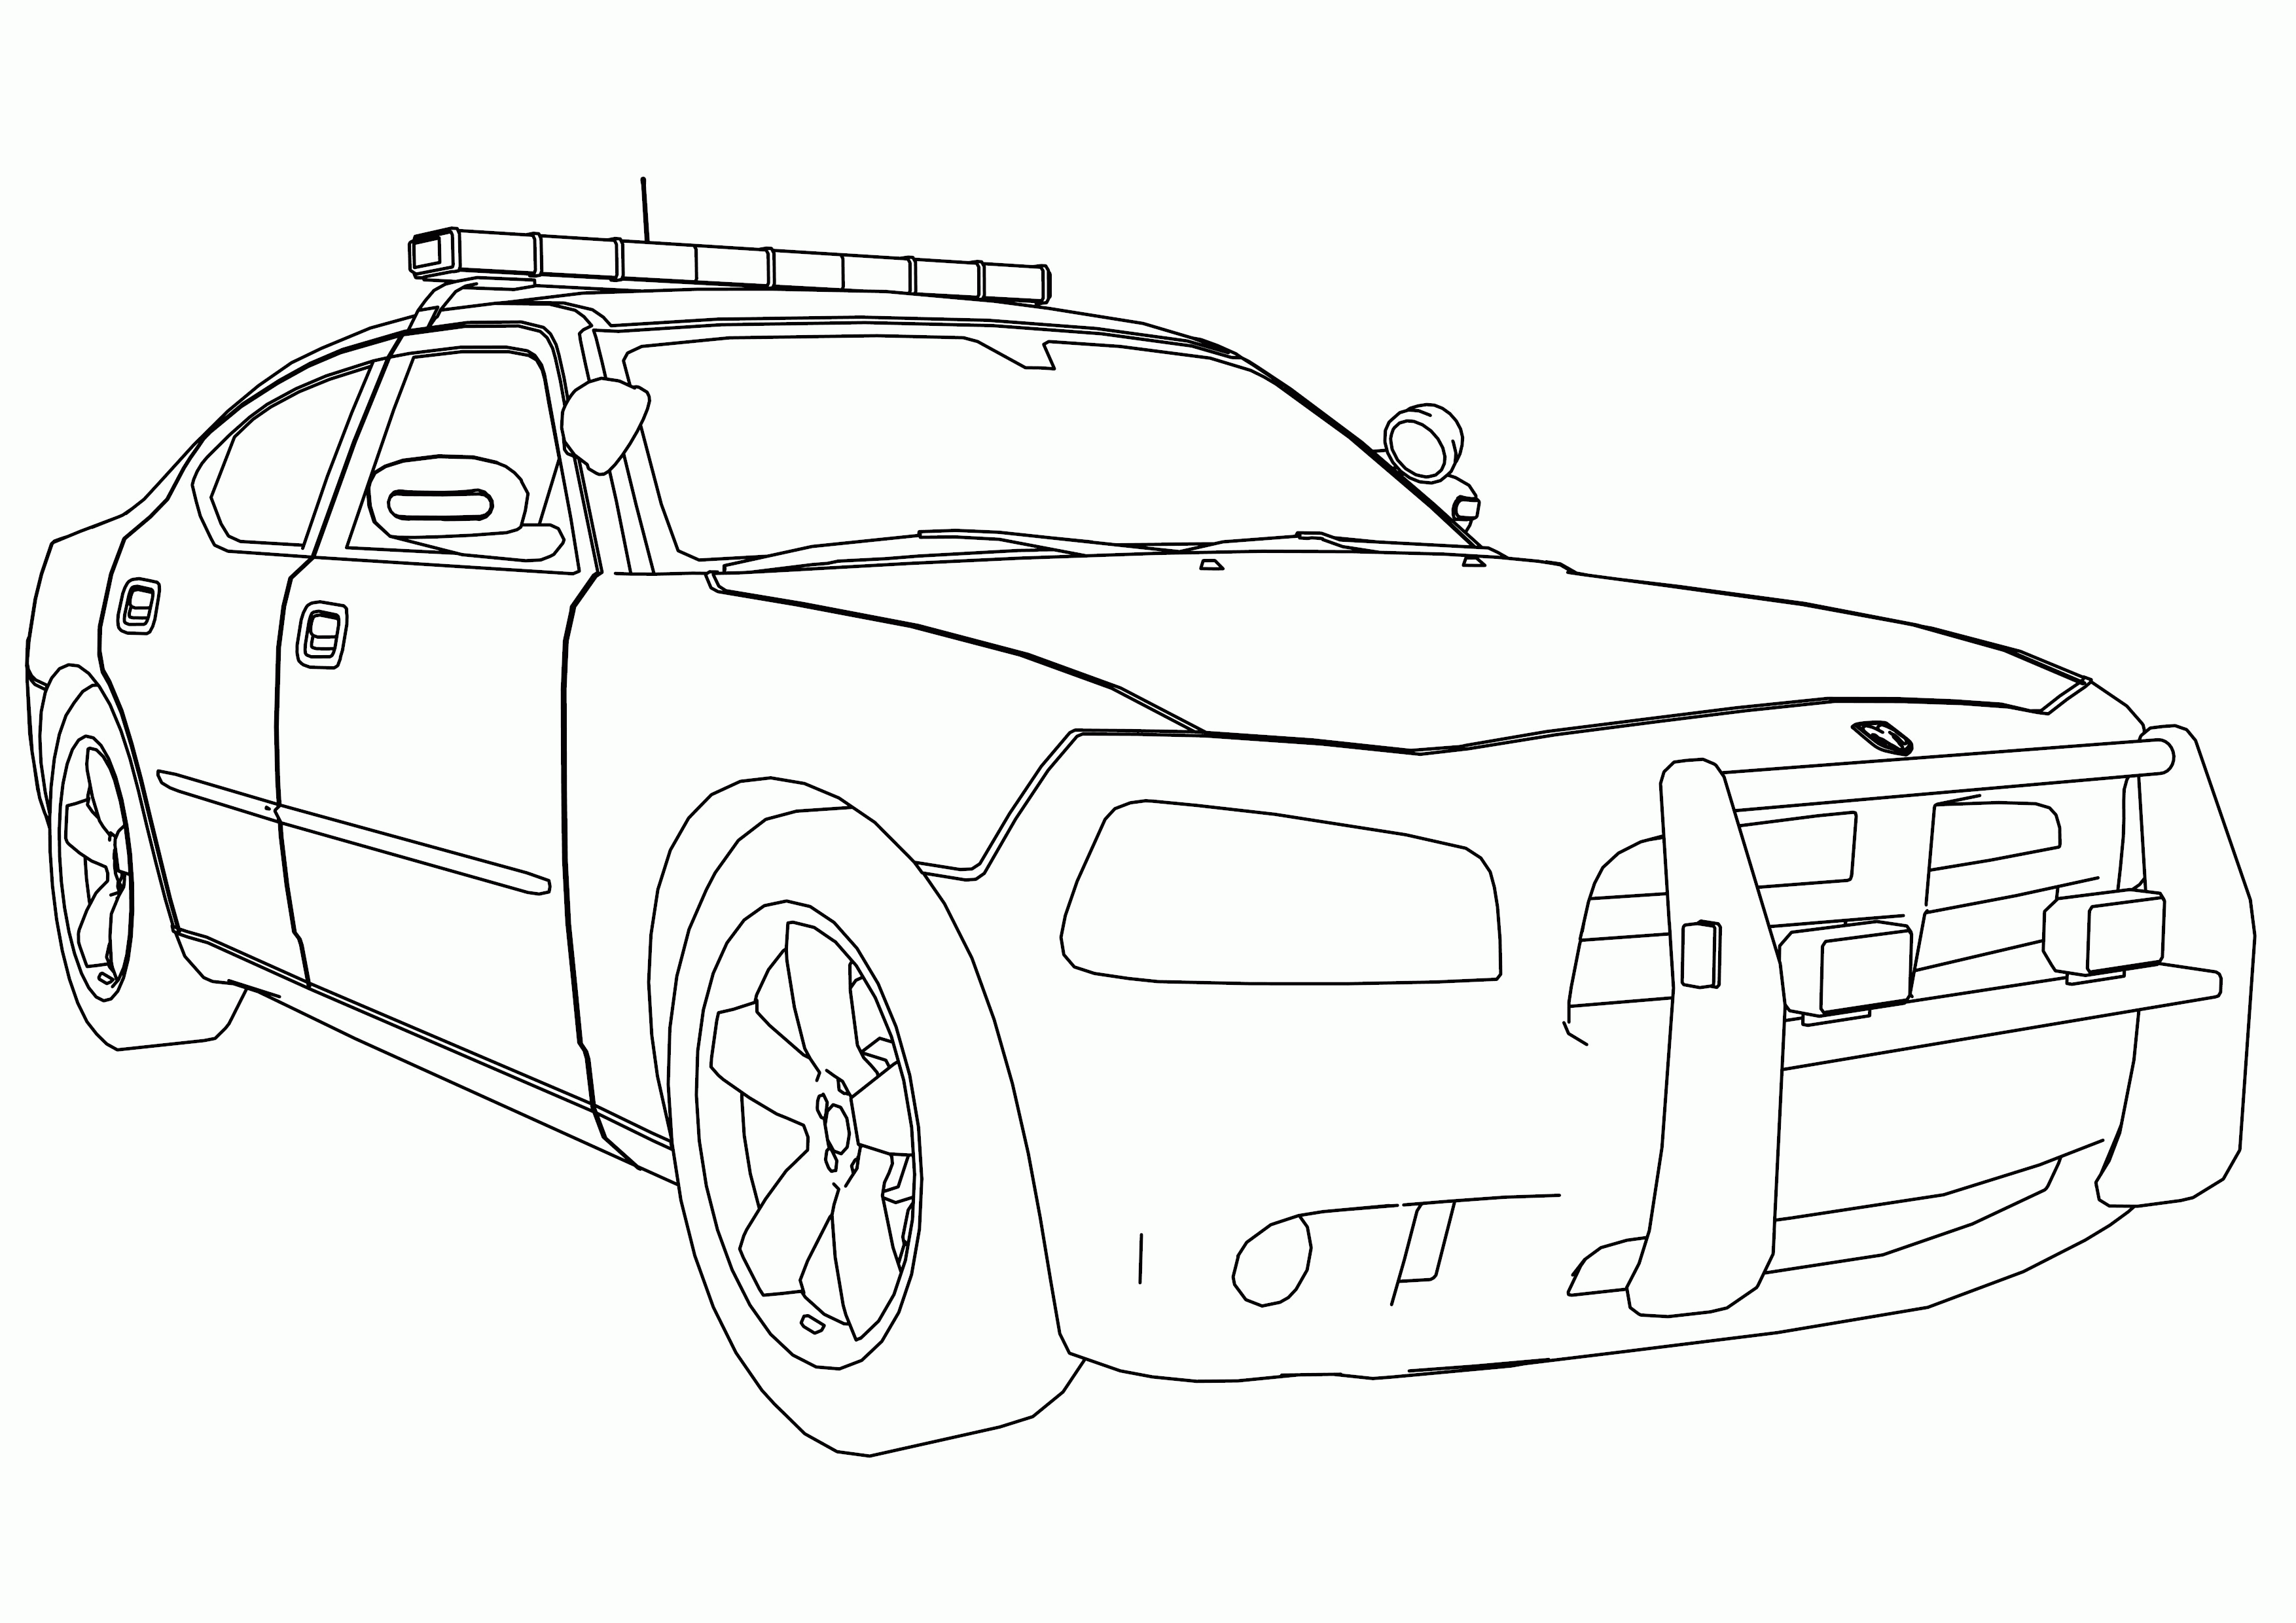 dodge charger coloring sheets image result for dodge charger coloring pages coloring dodge charger sheets coloring 